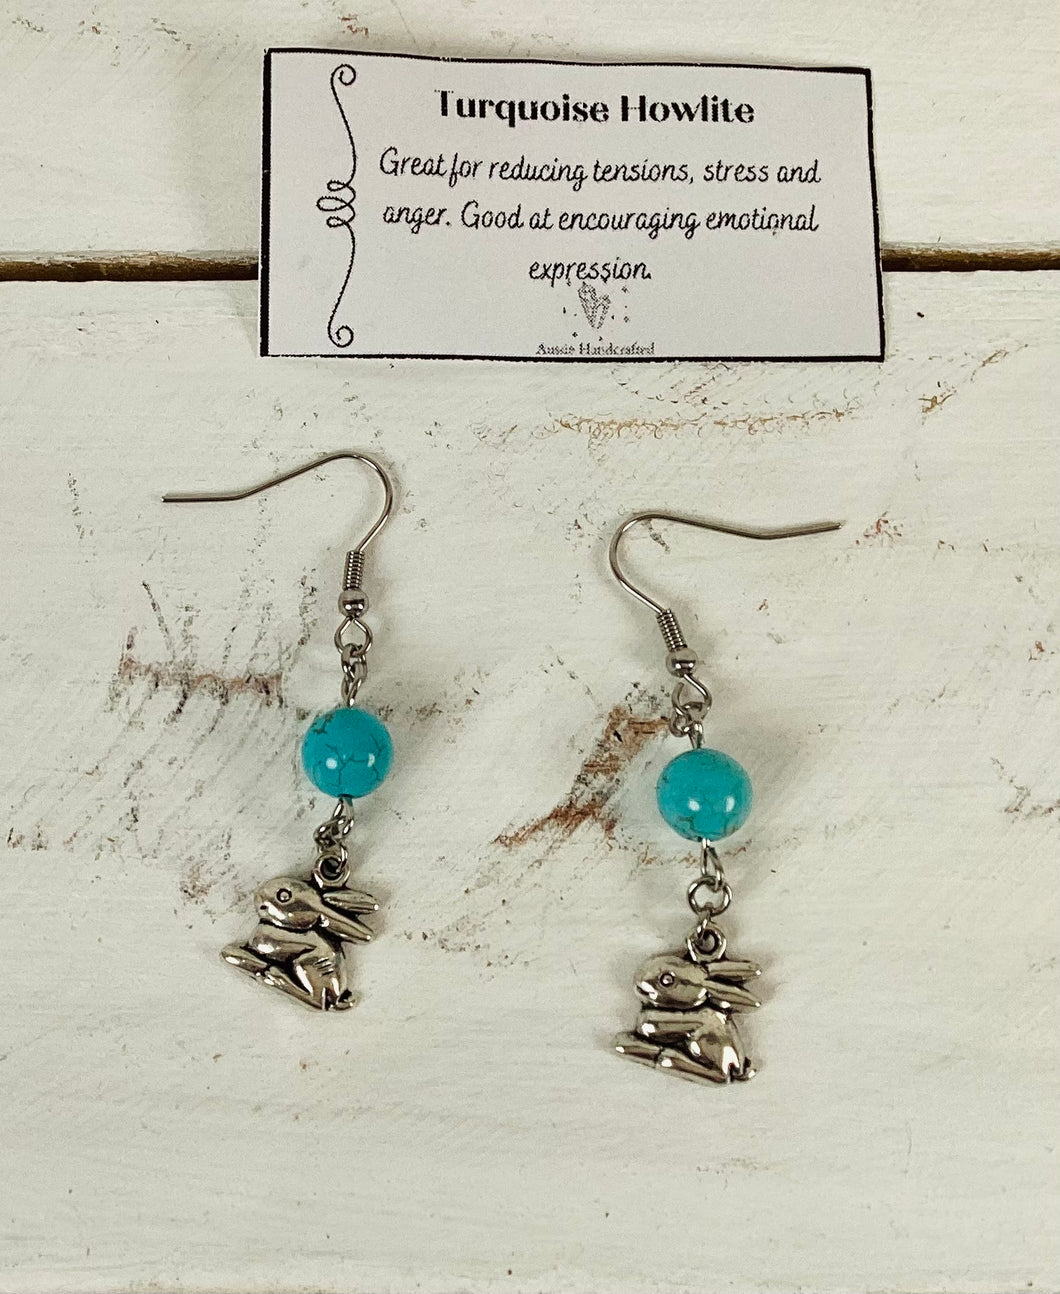 Turquoise Howlite Earrings by Nev